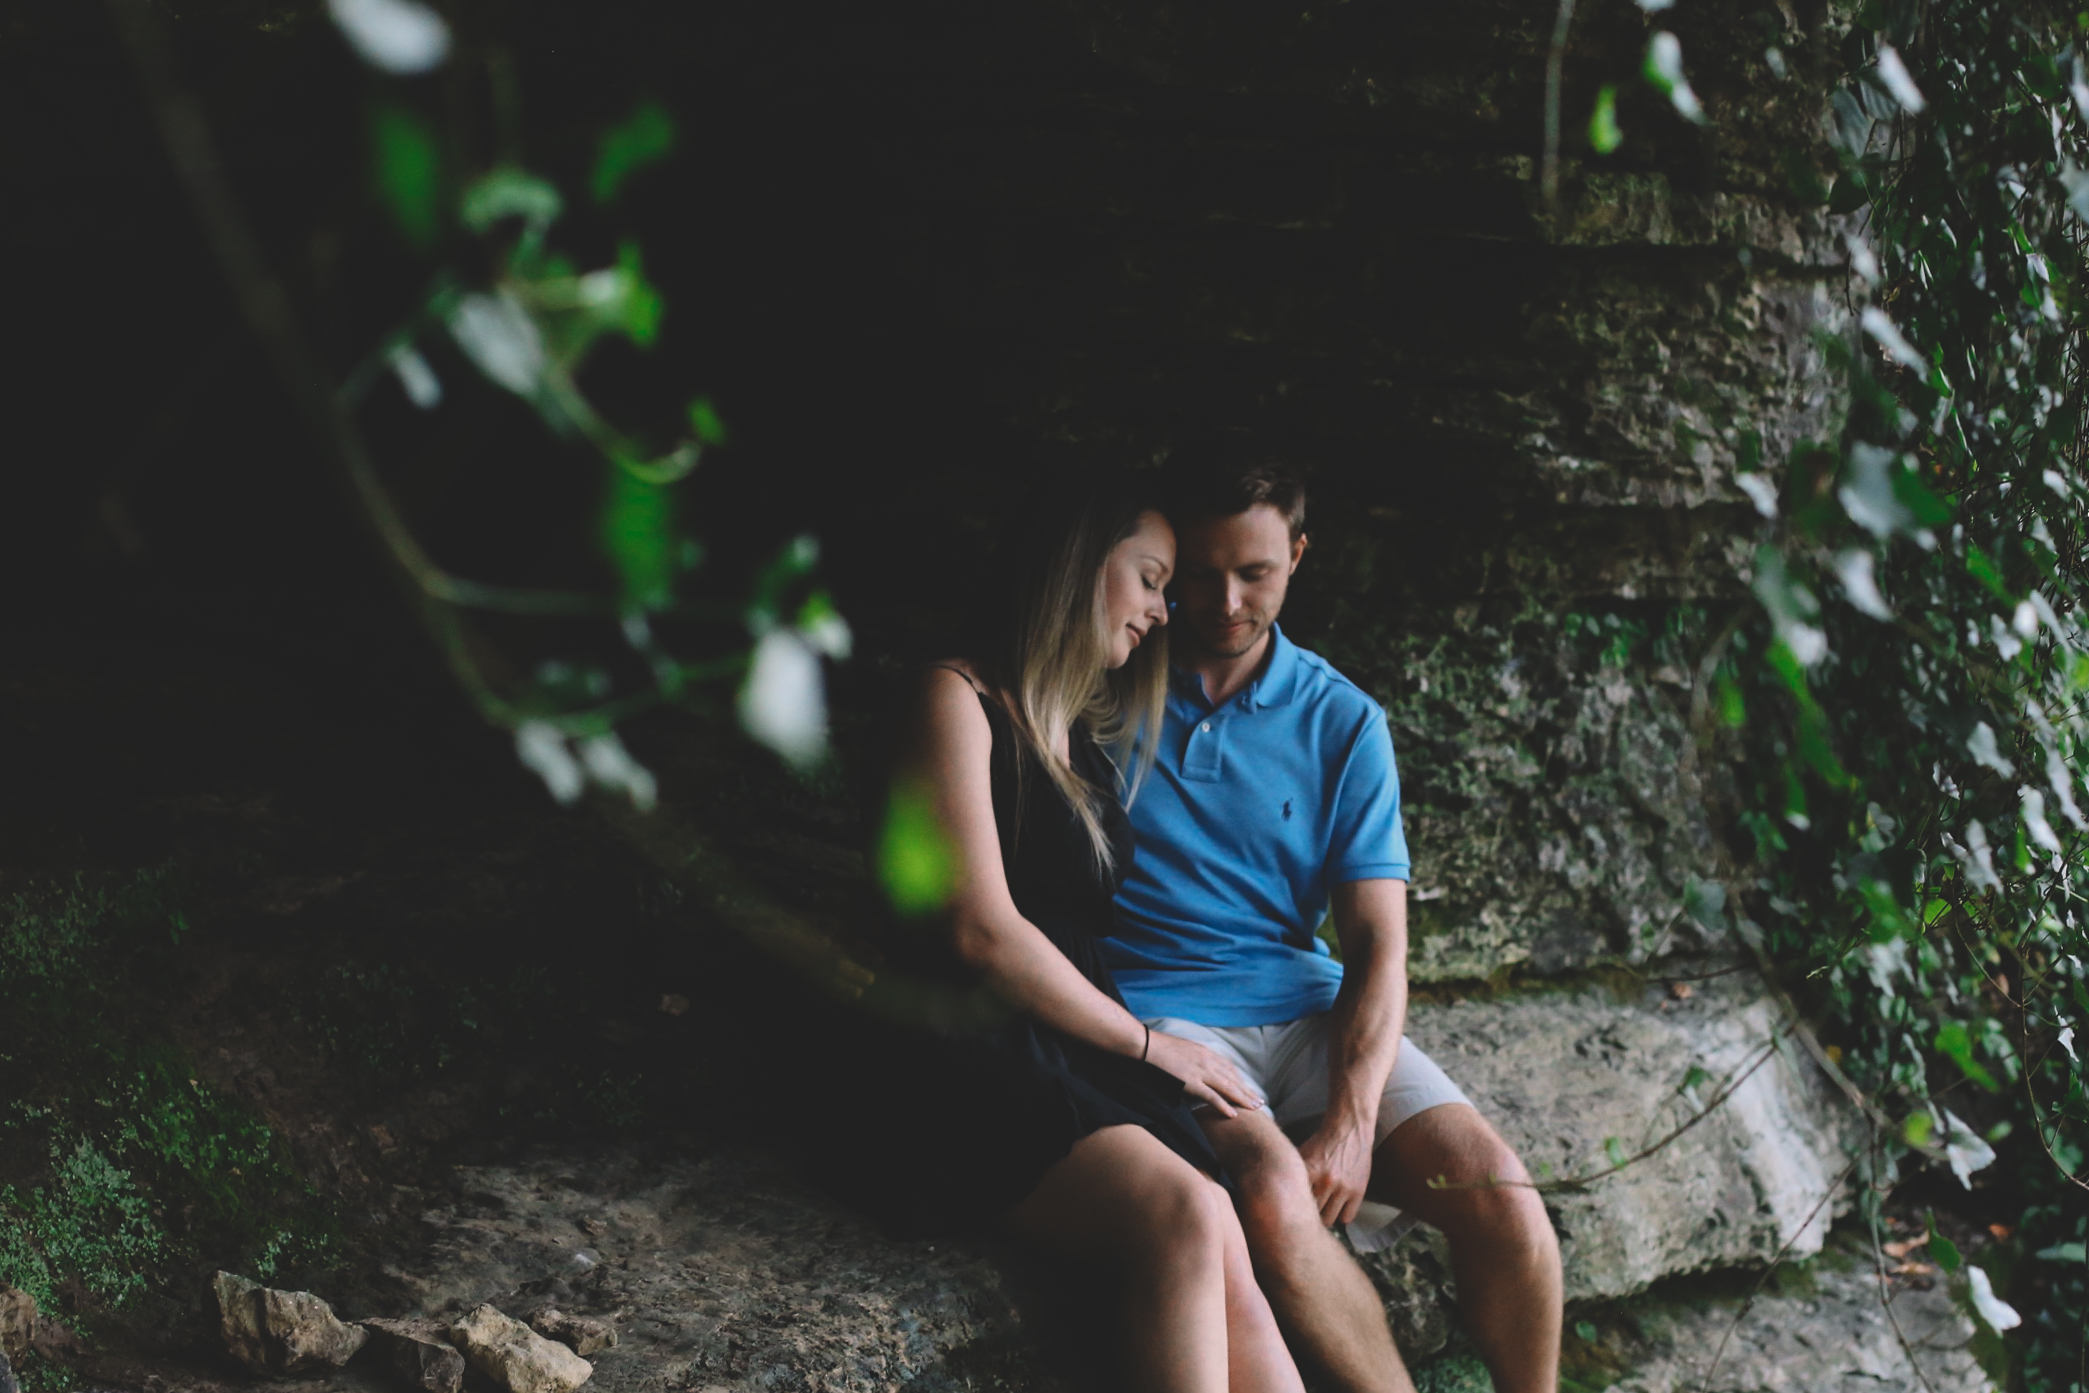 Elizabeth + Mitch Engagement Photo Session - Cherokee Park - Louisville, KY - Again We Say Rejoice Photography (37 of 173).jpg